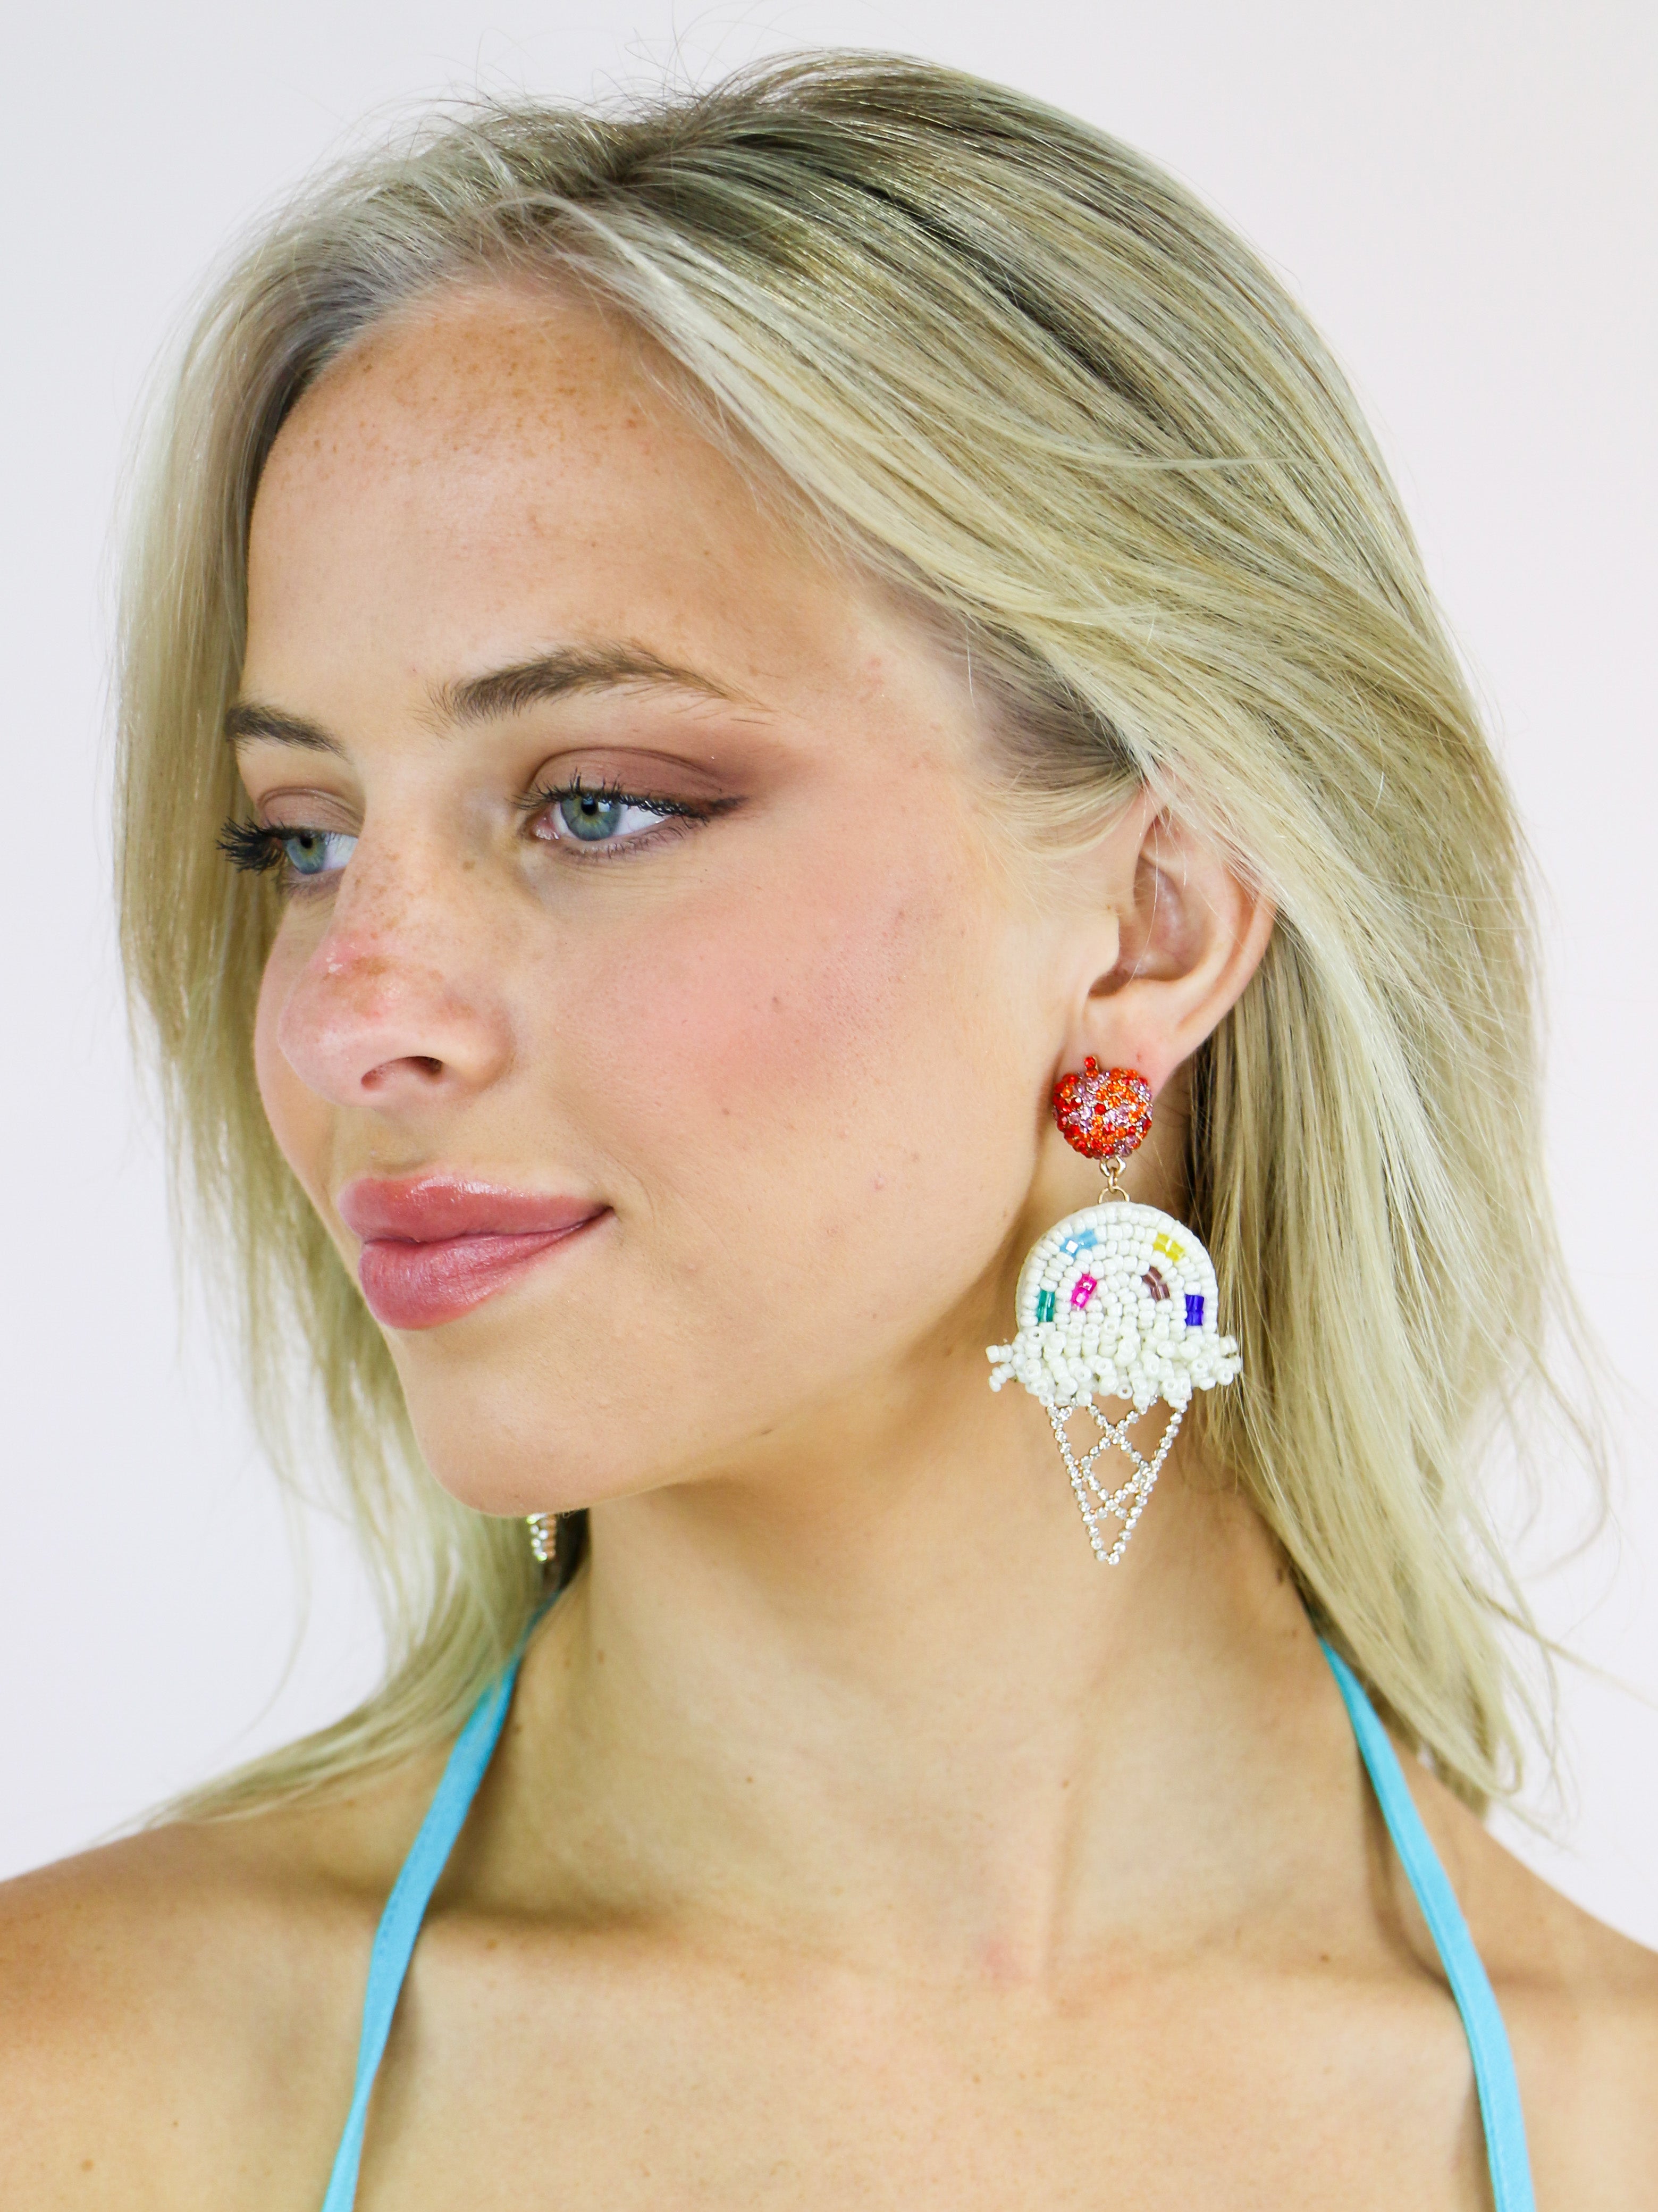 Ice(cream) For These Earrings